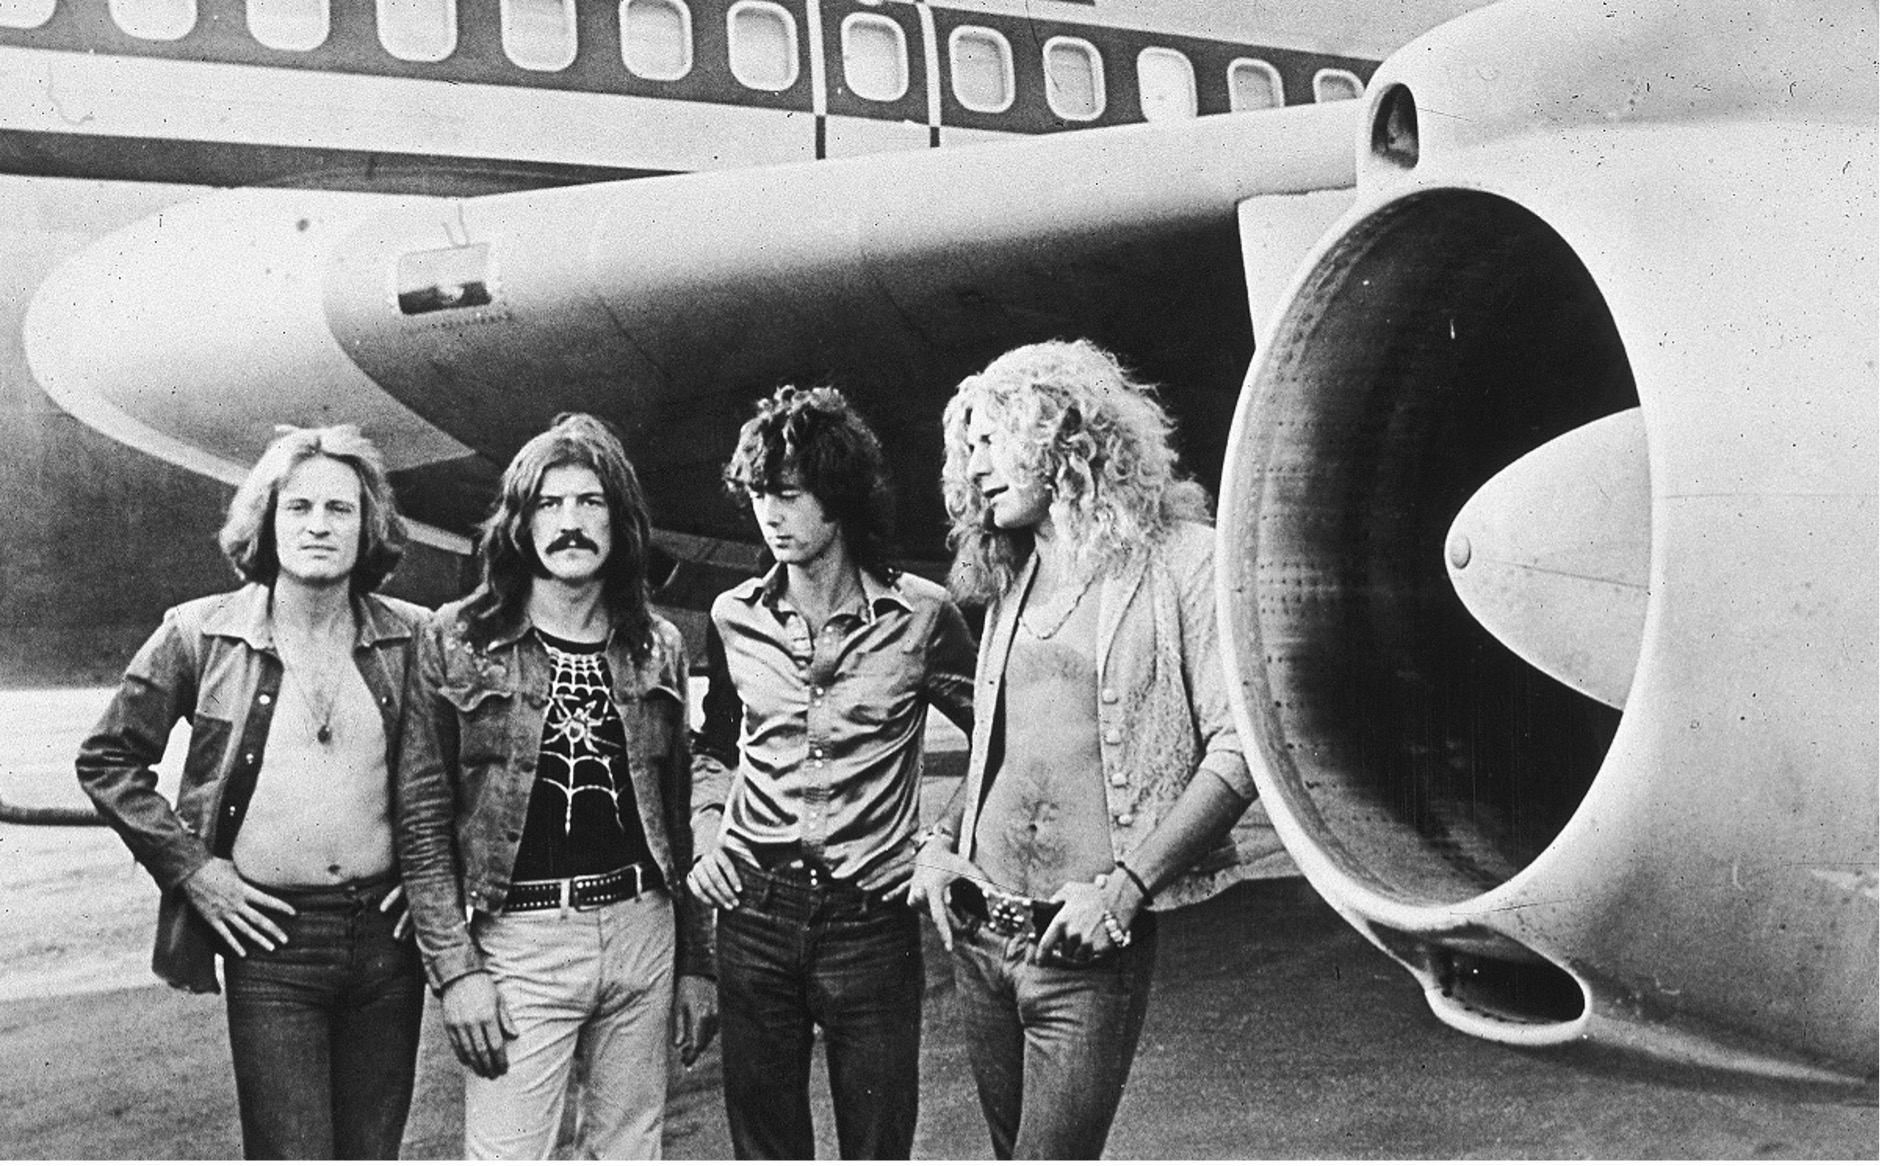 Led Zeppelin on the road.  ‘According to a recent study, musicians are twice as likely to suffer from depression and anxiety, not because the arts attract melancholics but because of things like antisocial working hours, lack of support from people in positions of authority, and time away from home’ (Far Out magazine 2022). Photo by Hulton Archive/Getty Images.